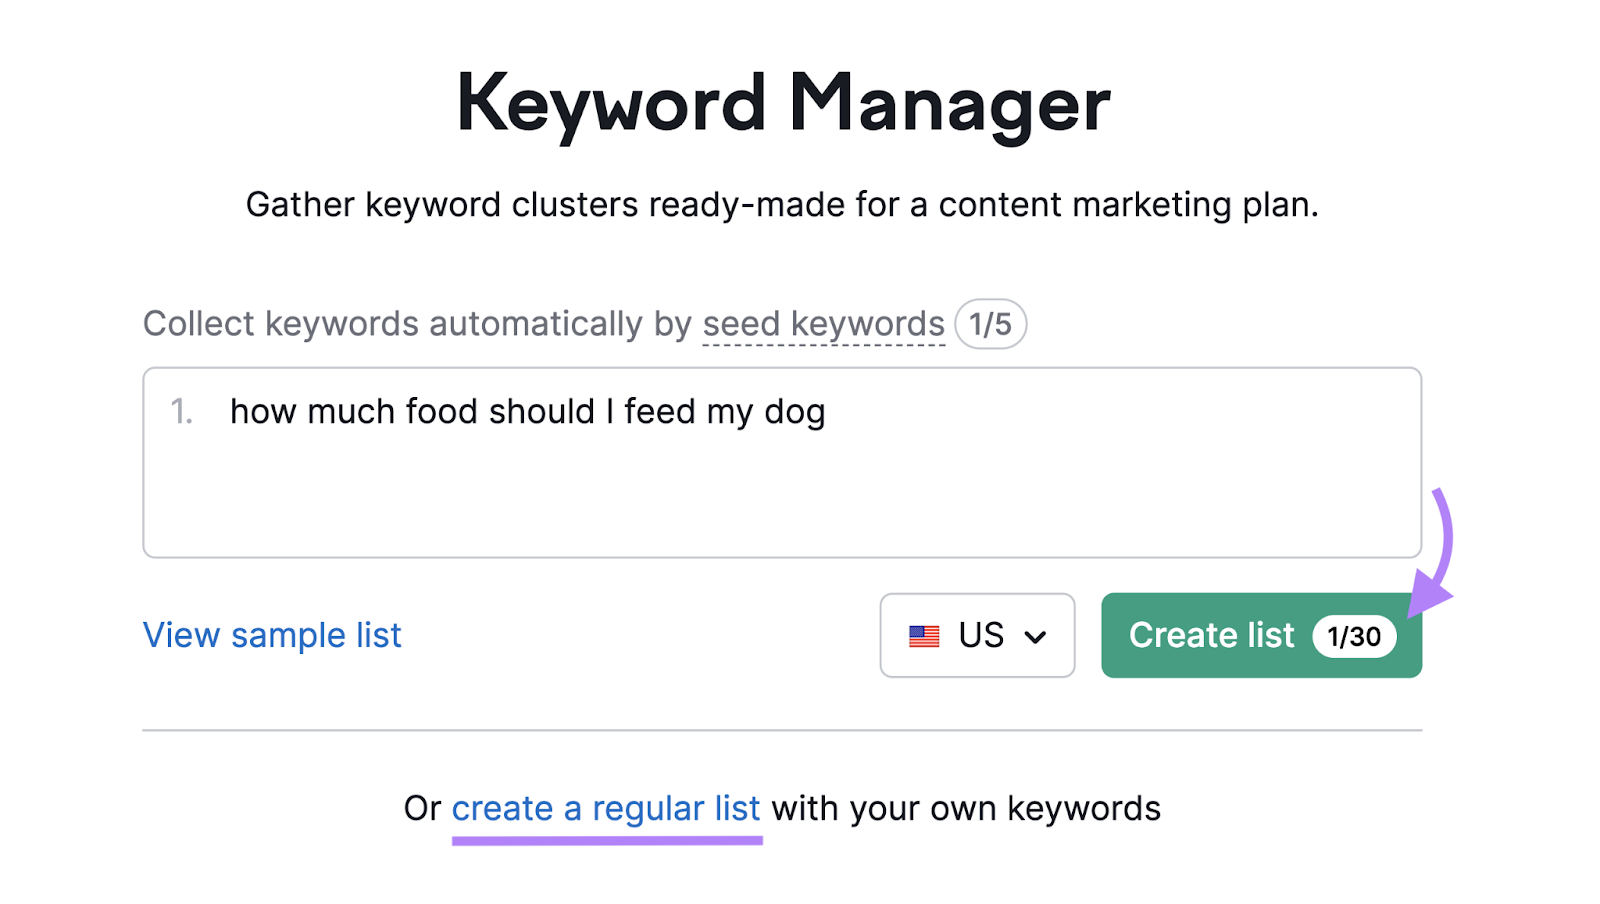 "how much food should I feed my " keyword entered into the Keyword Manager tool